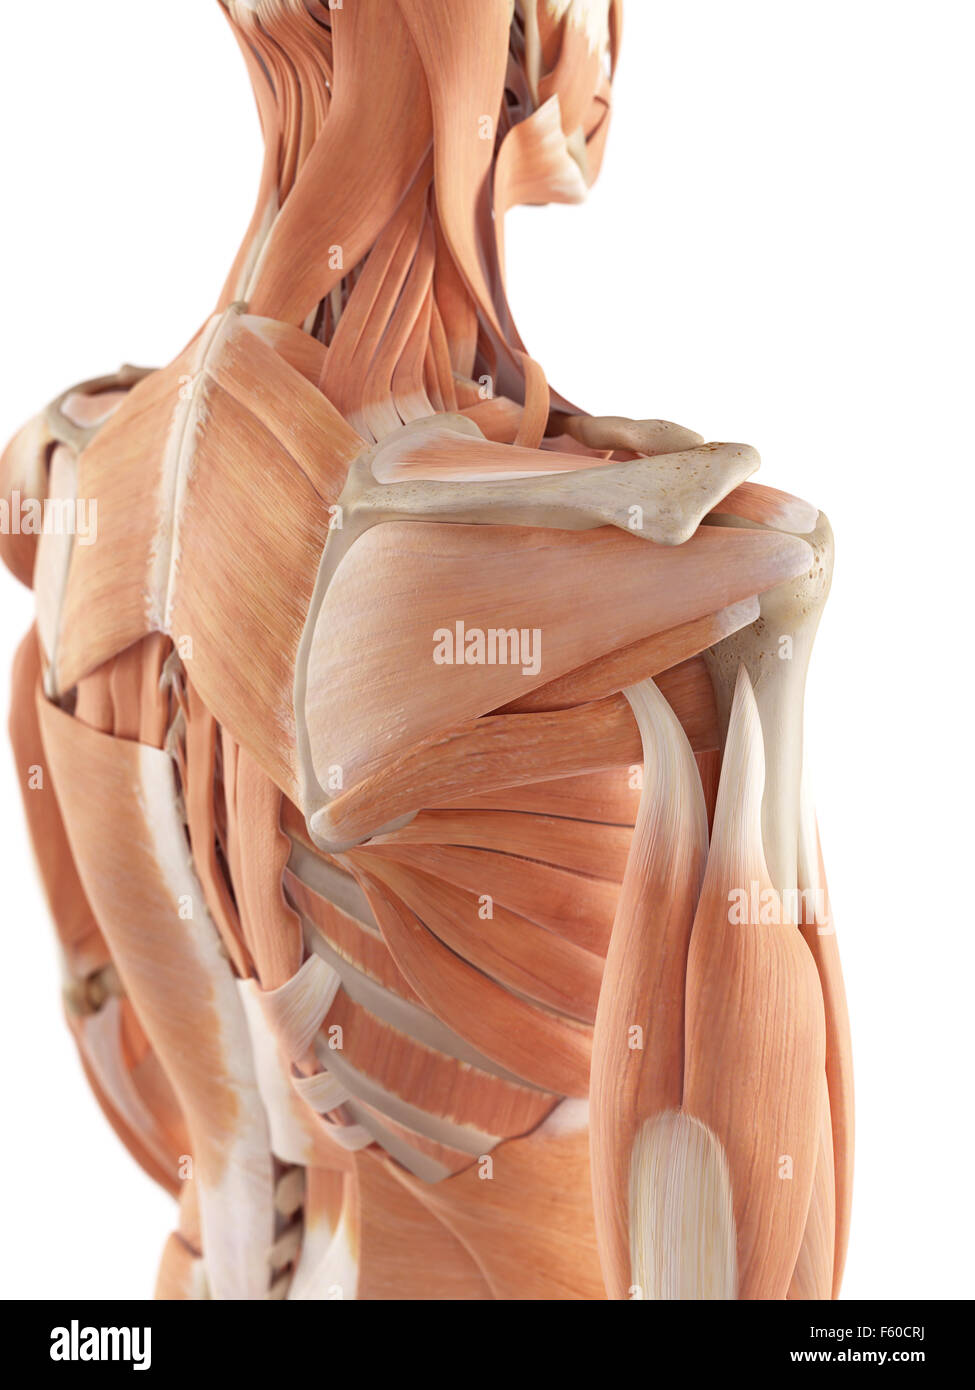 medical accurate illustration of the shoulder muscles Stock Photo